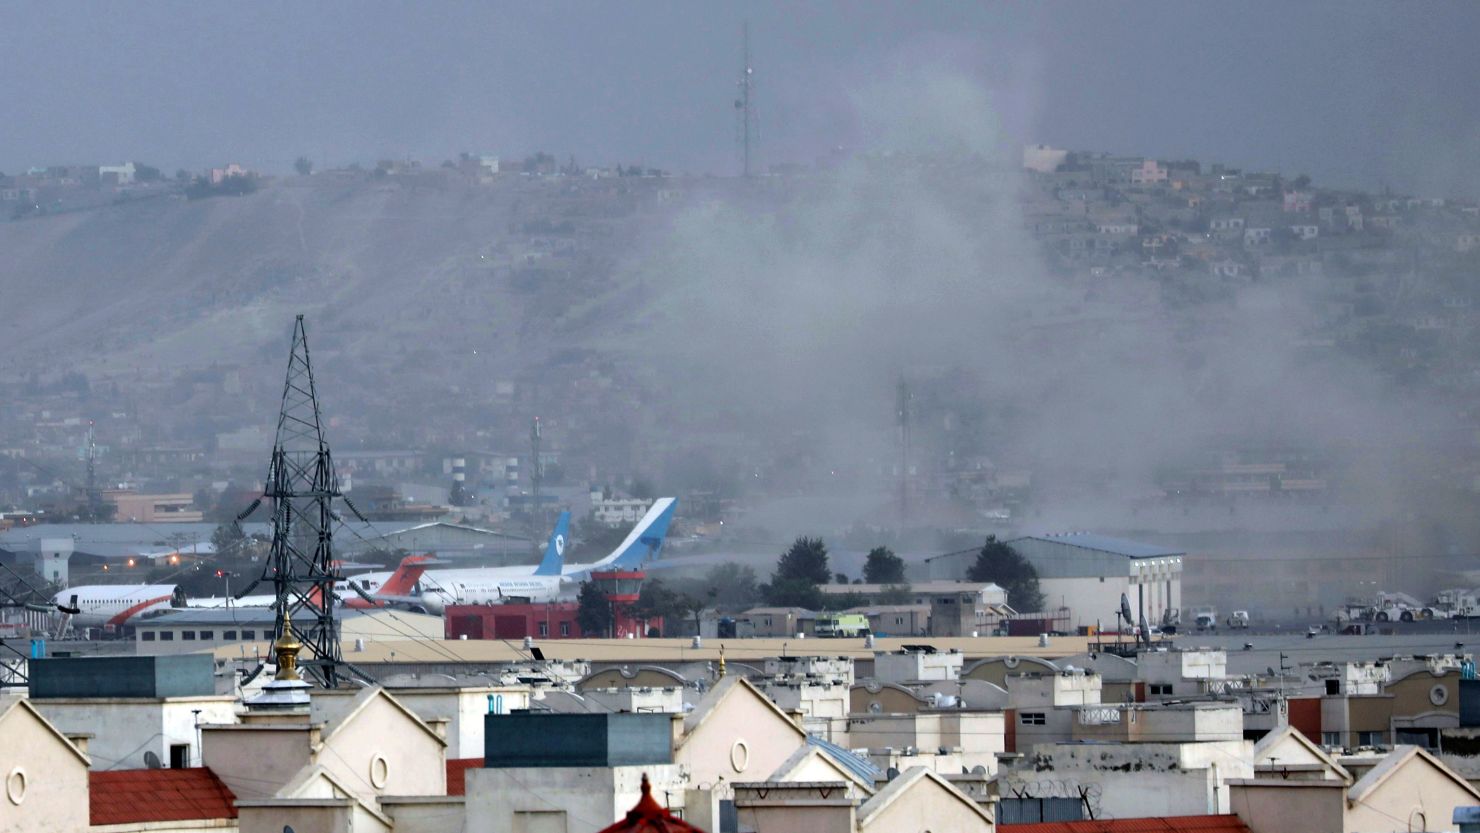 In this August 26, 2021 photo, smoke rises from a deadly explosion outside the airport in Kabul, Afghanistan.